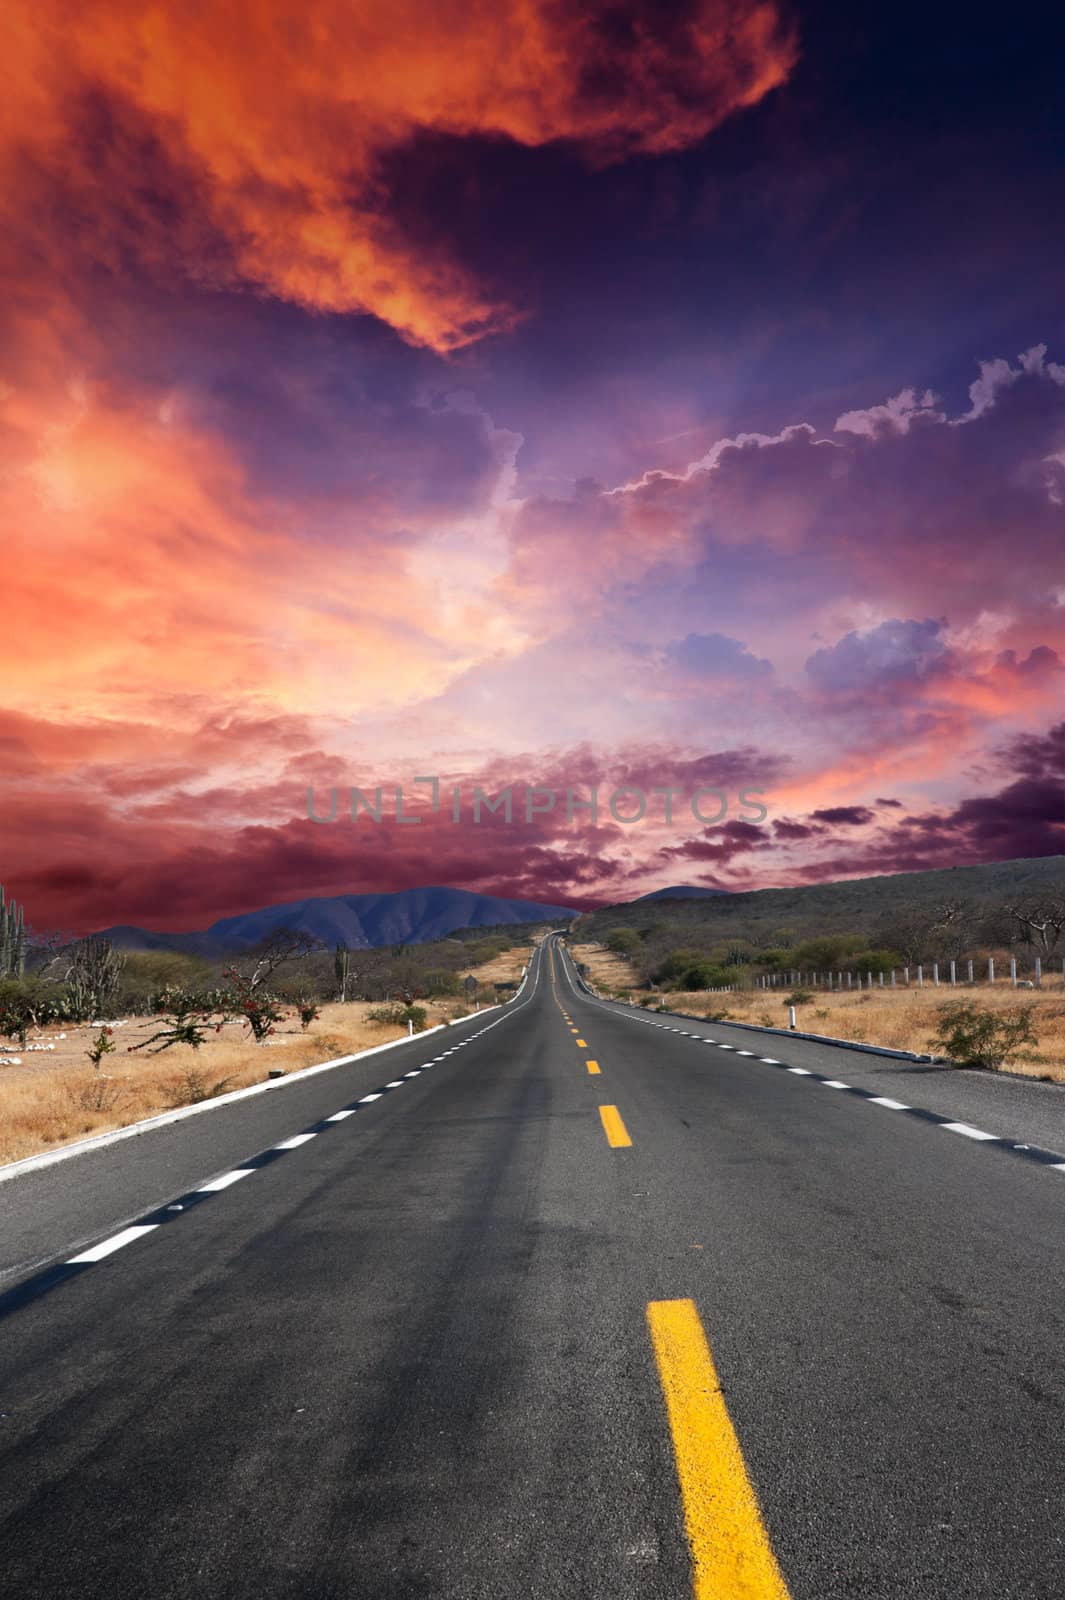 Road in desert with dramatic sky